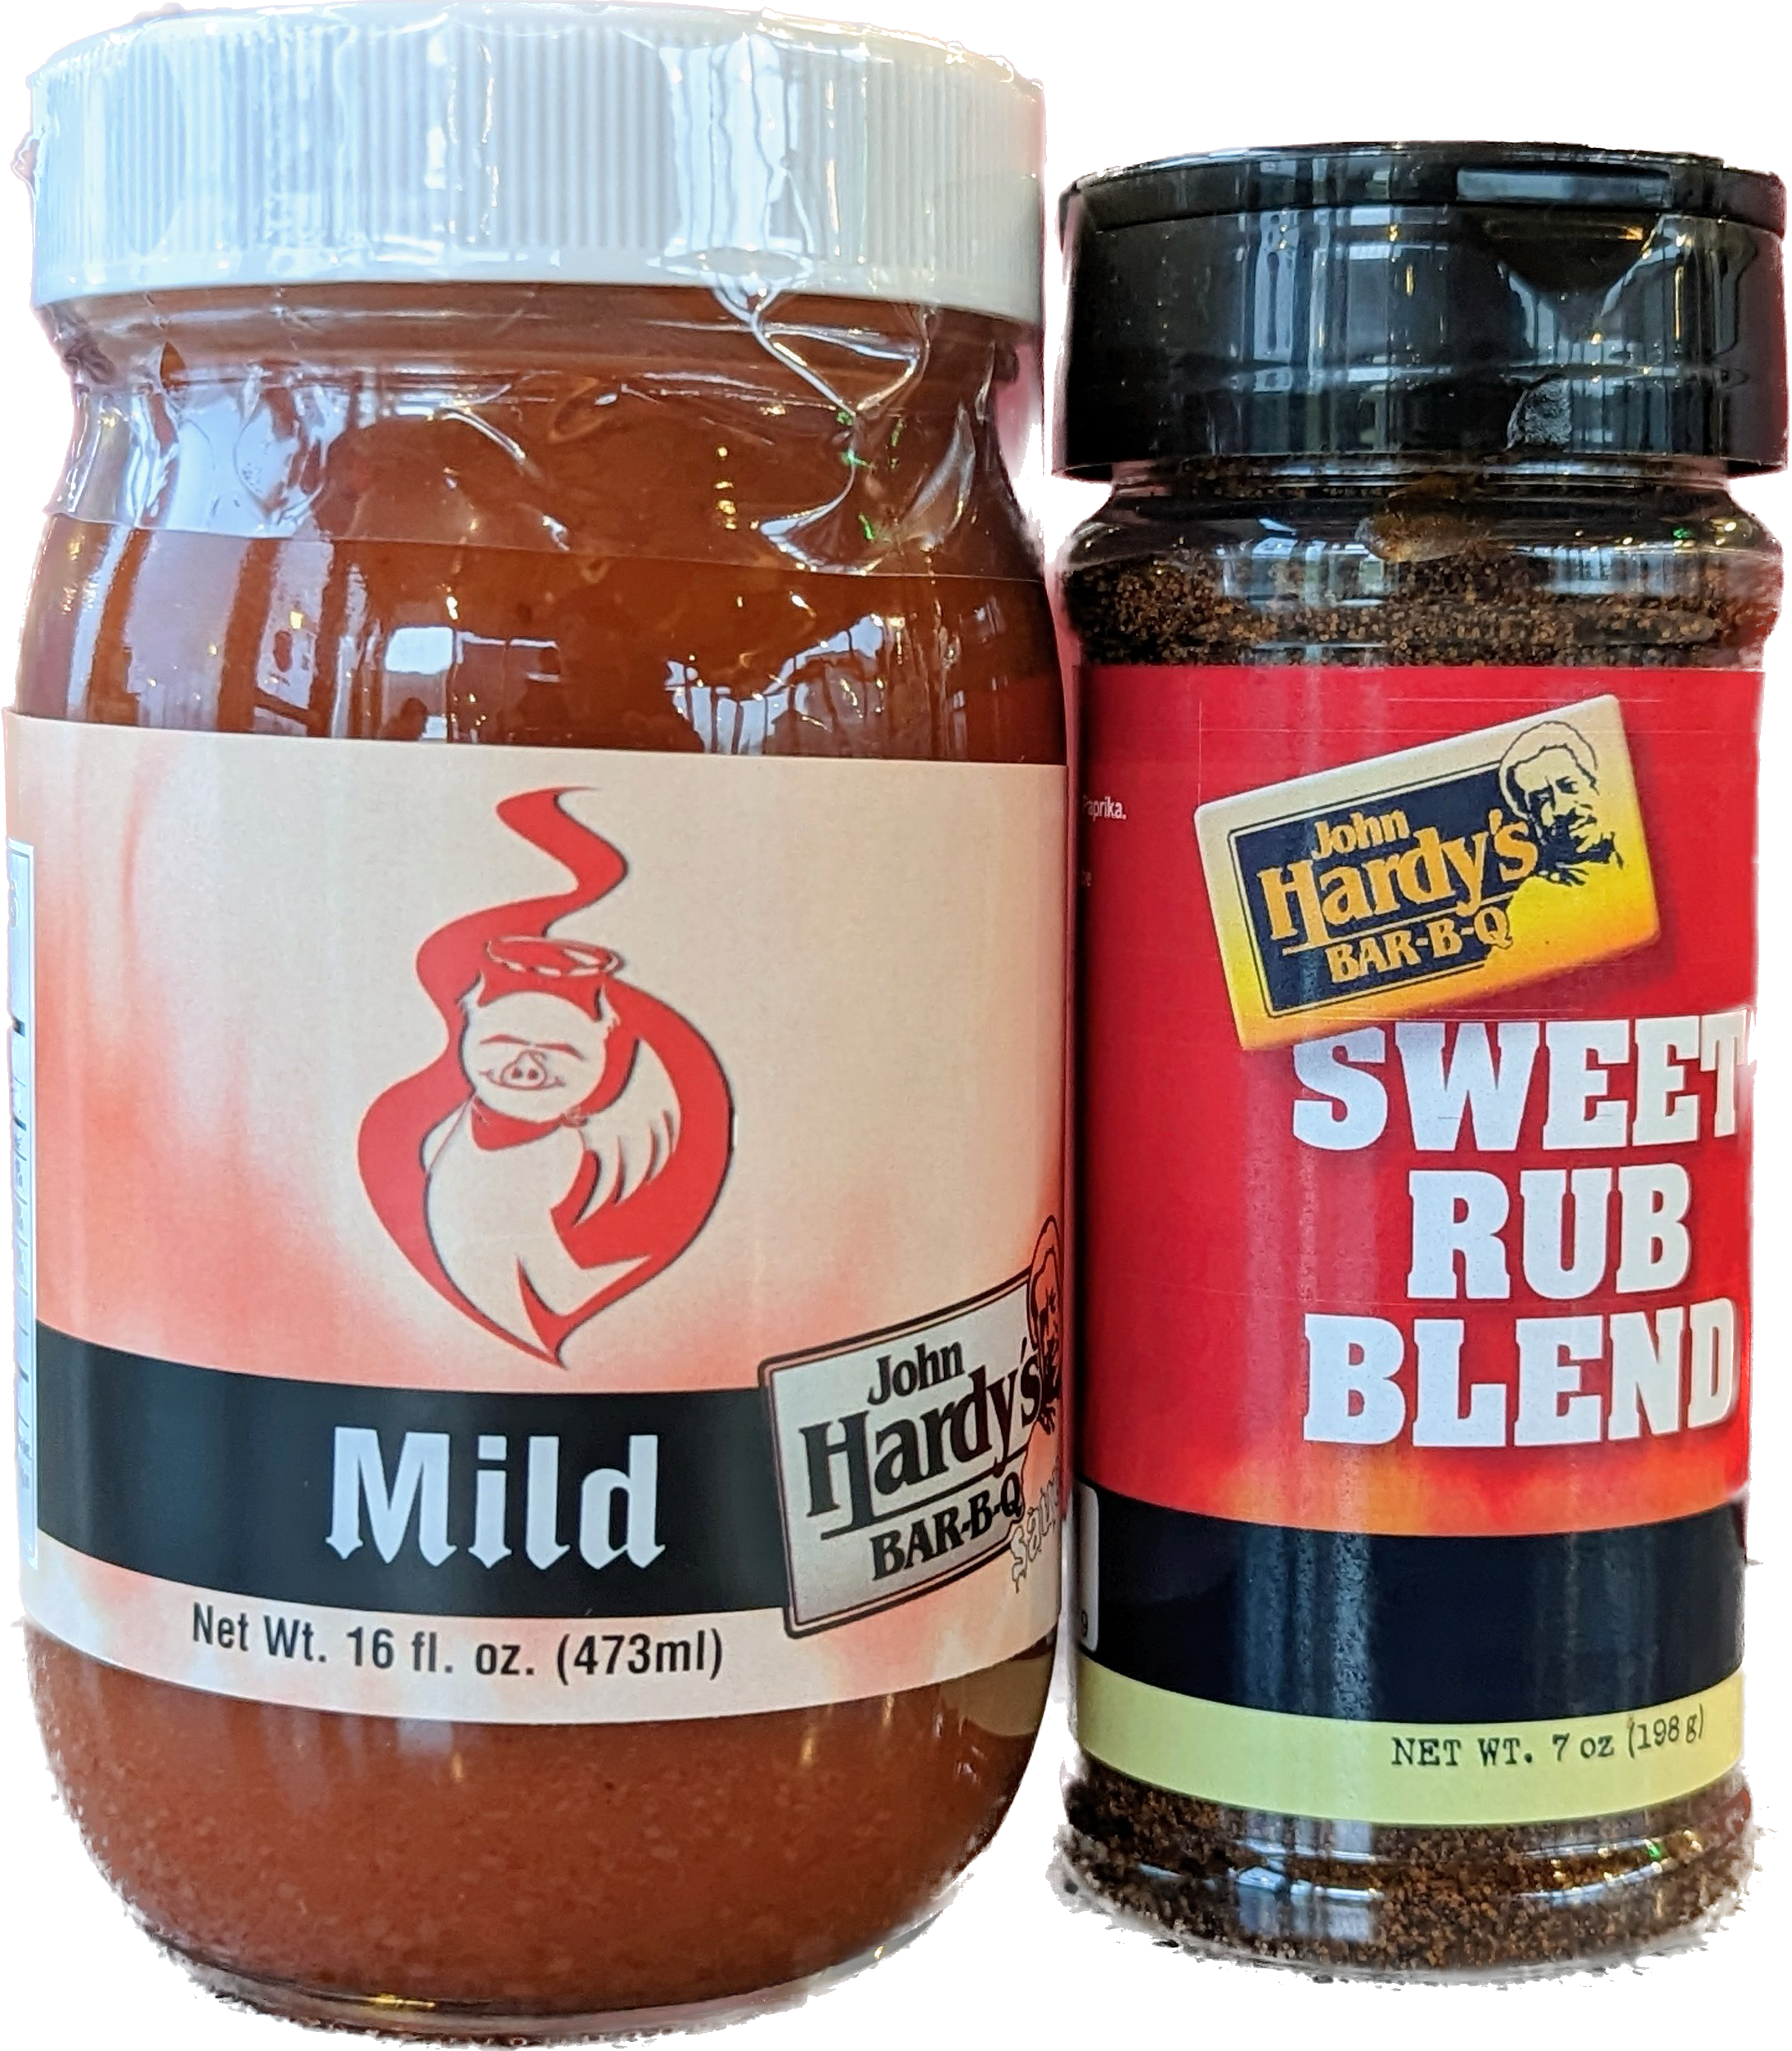 John Hardy’s Mix and Match Sauce and Rub 3-Pack (Online Price Only – Plus Shipping Cost)